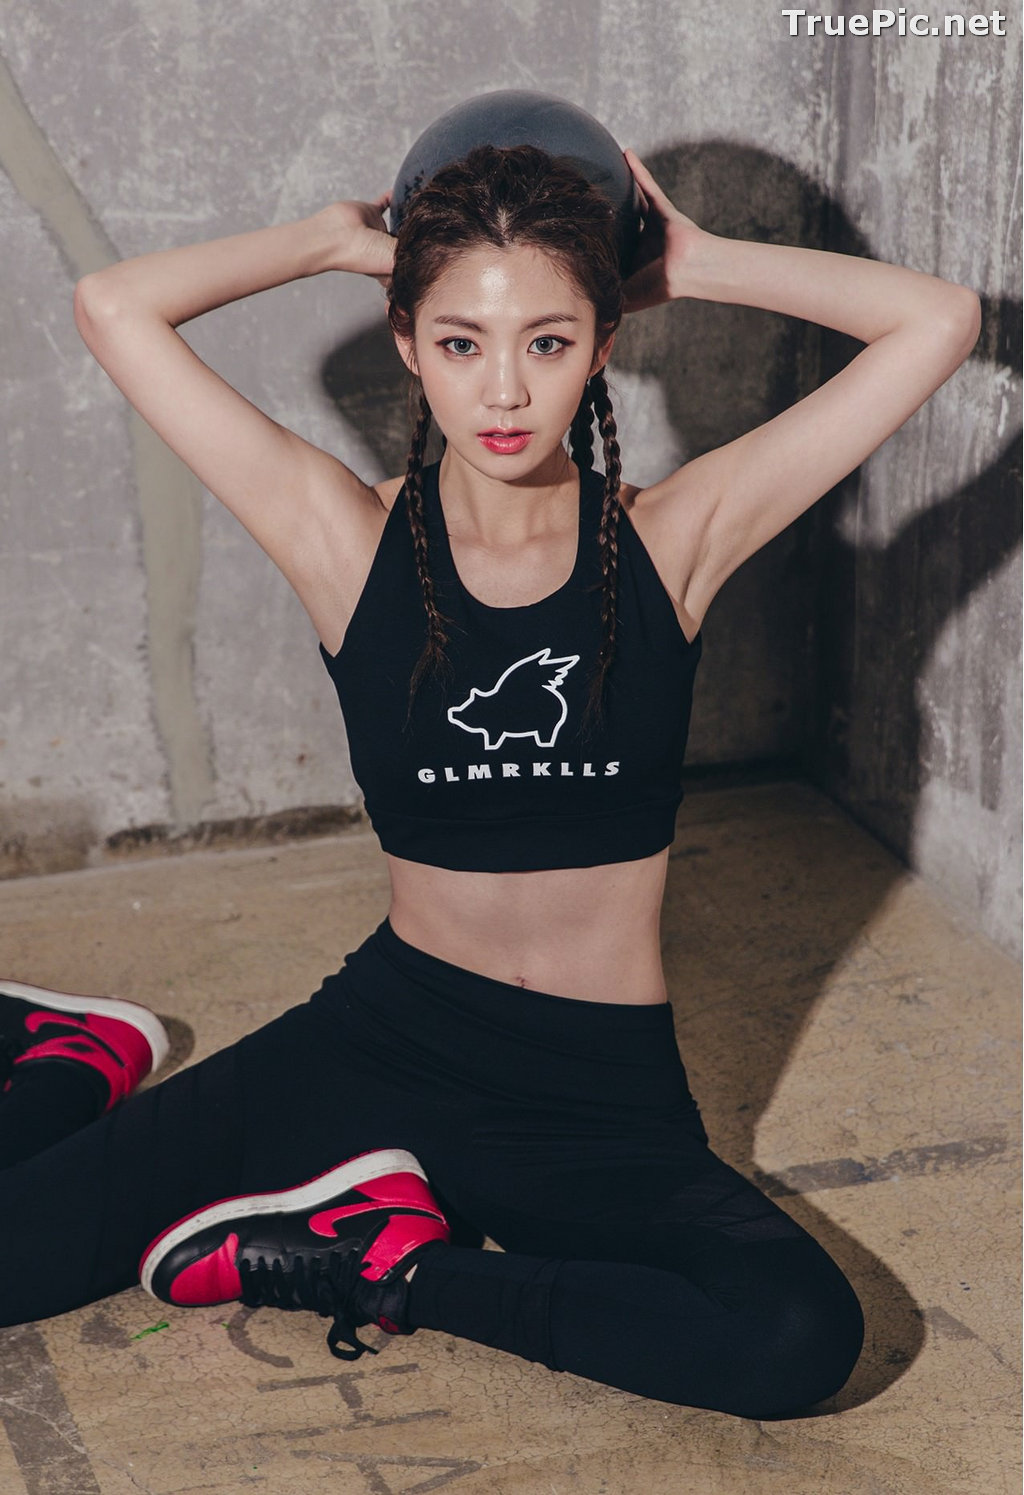 Image Korean Fashion Model - Lee Chae Eun - Fitness Set Collection #1 - TruePic.net - Picture-71